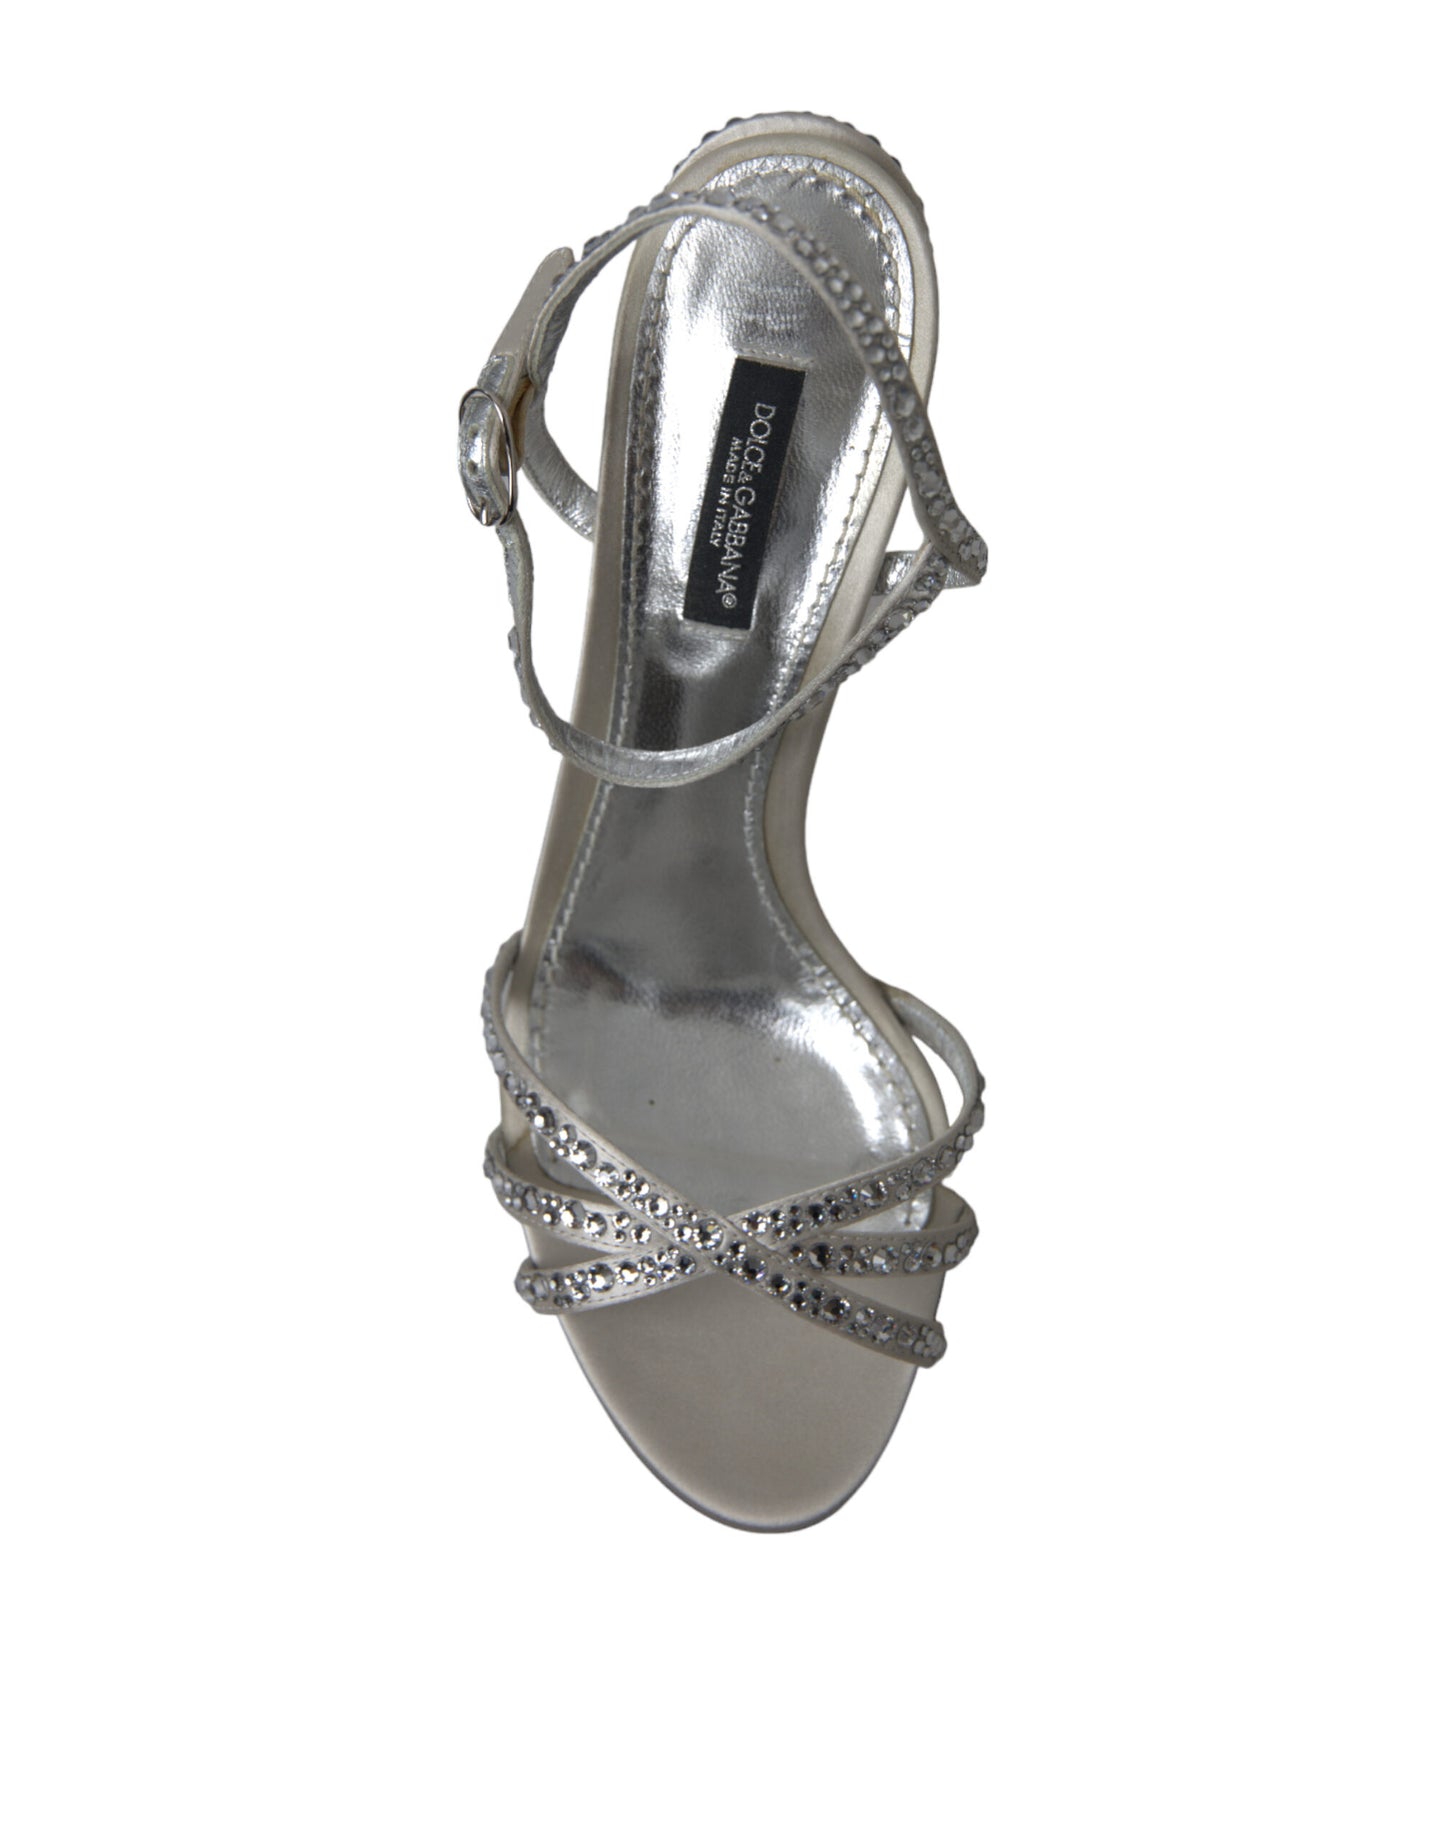 Silver Crystal Ankle Strap Sandals Shoes